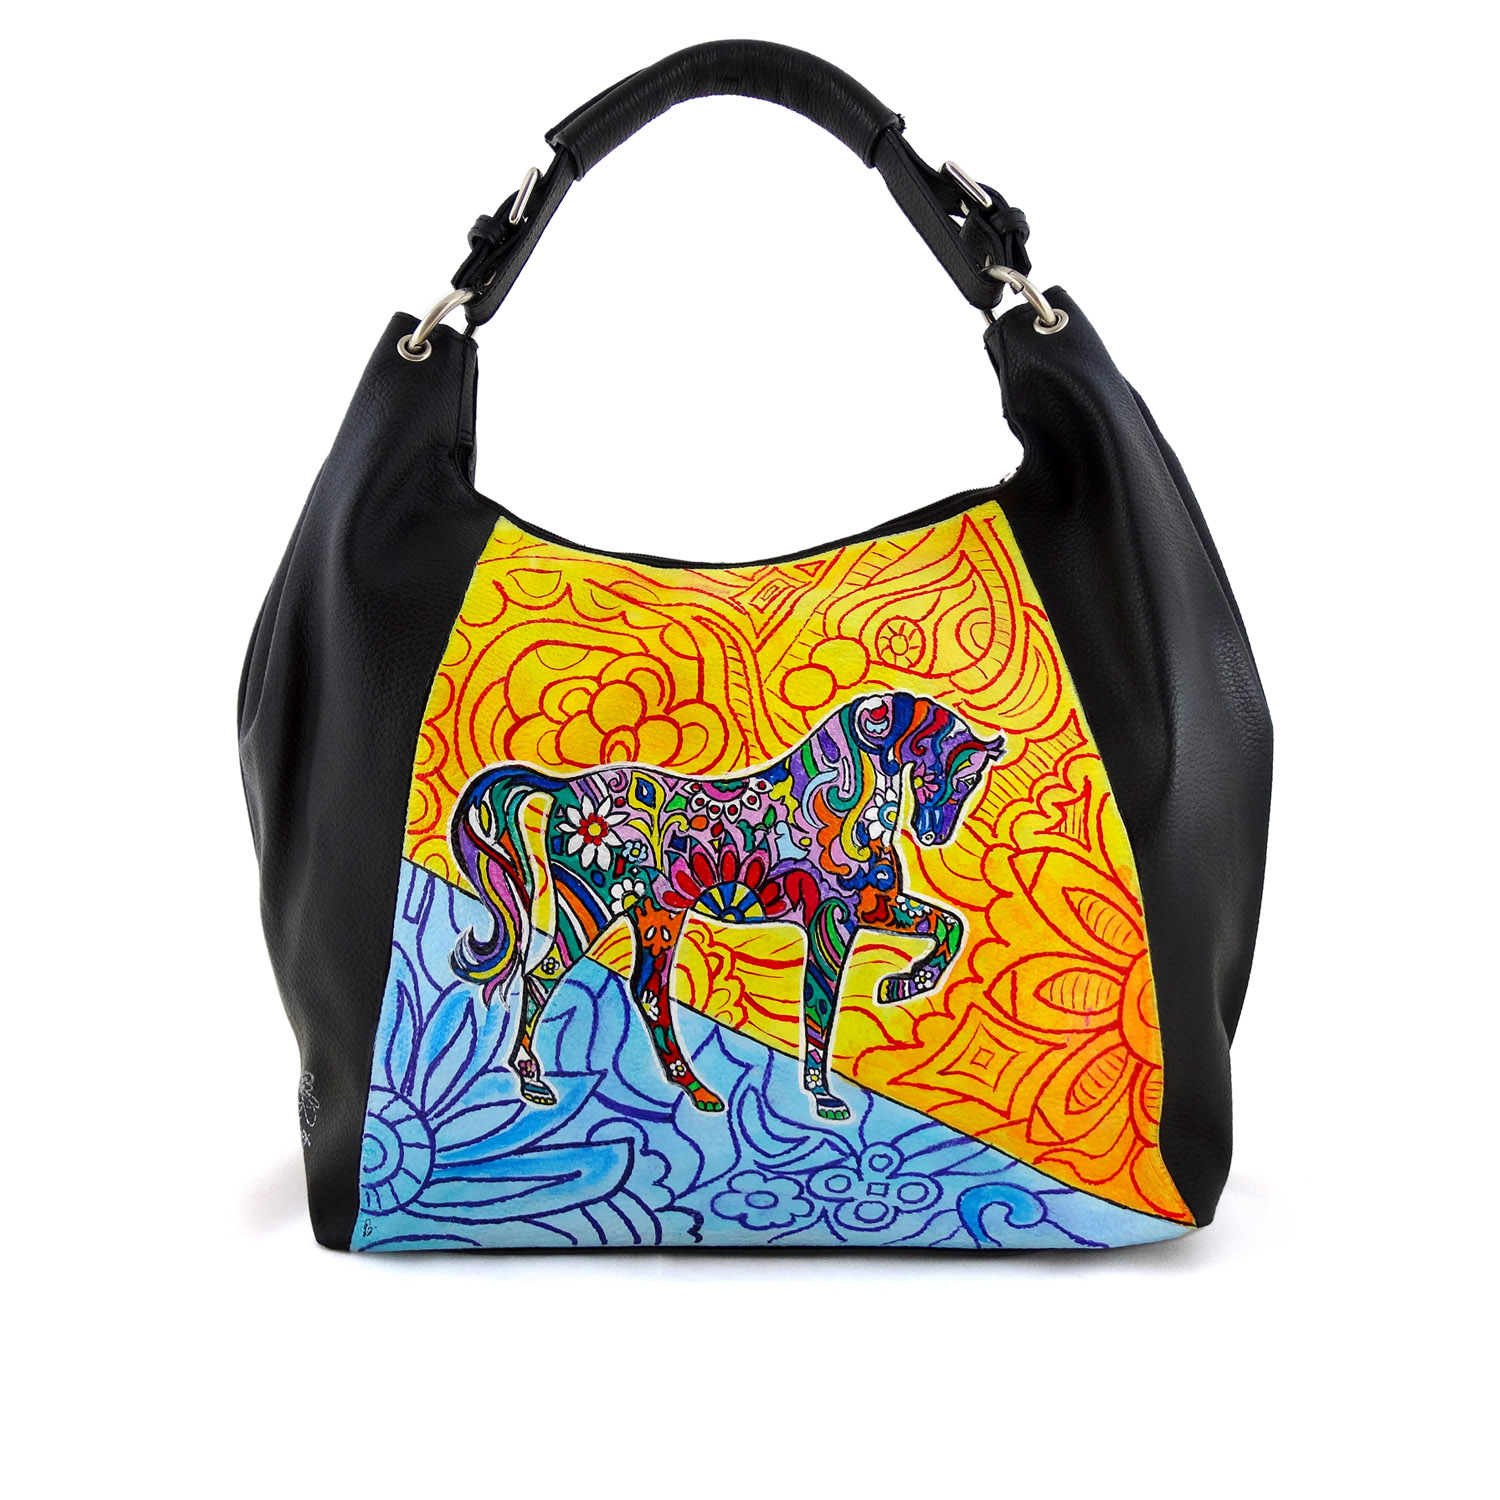 Hand-painted bag - Horse